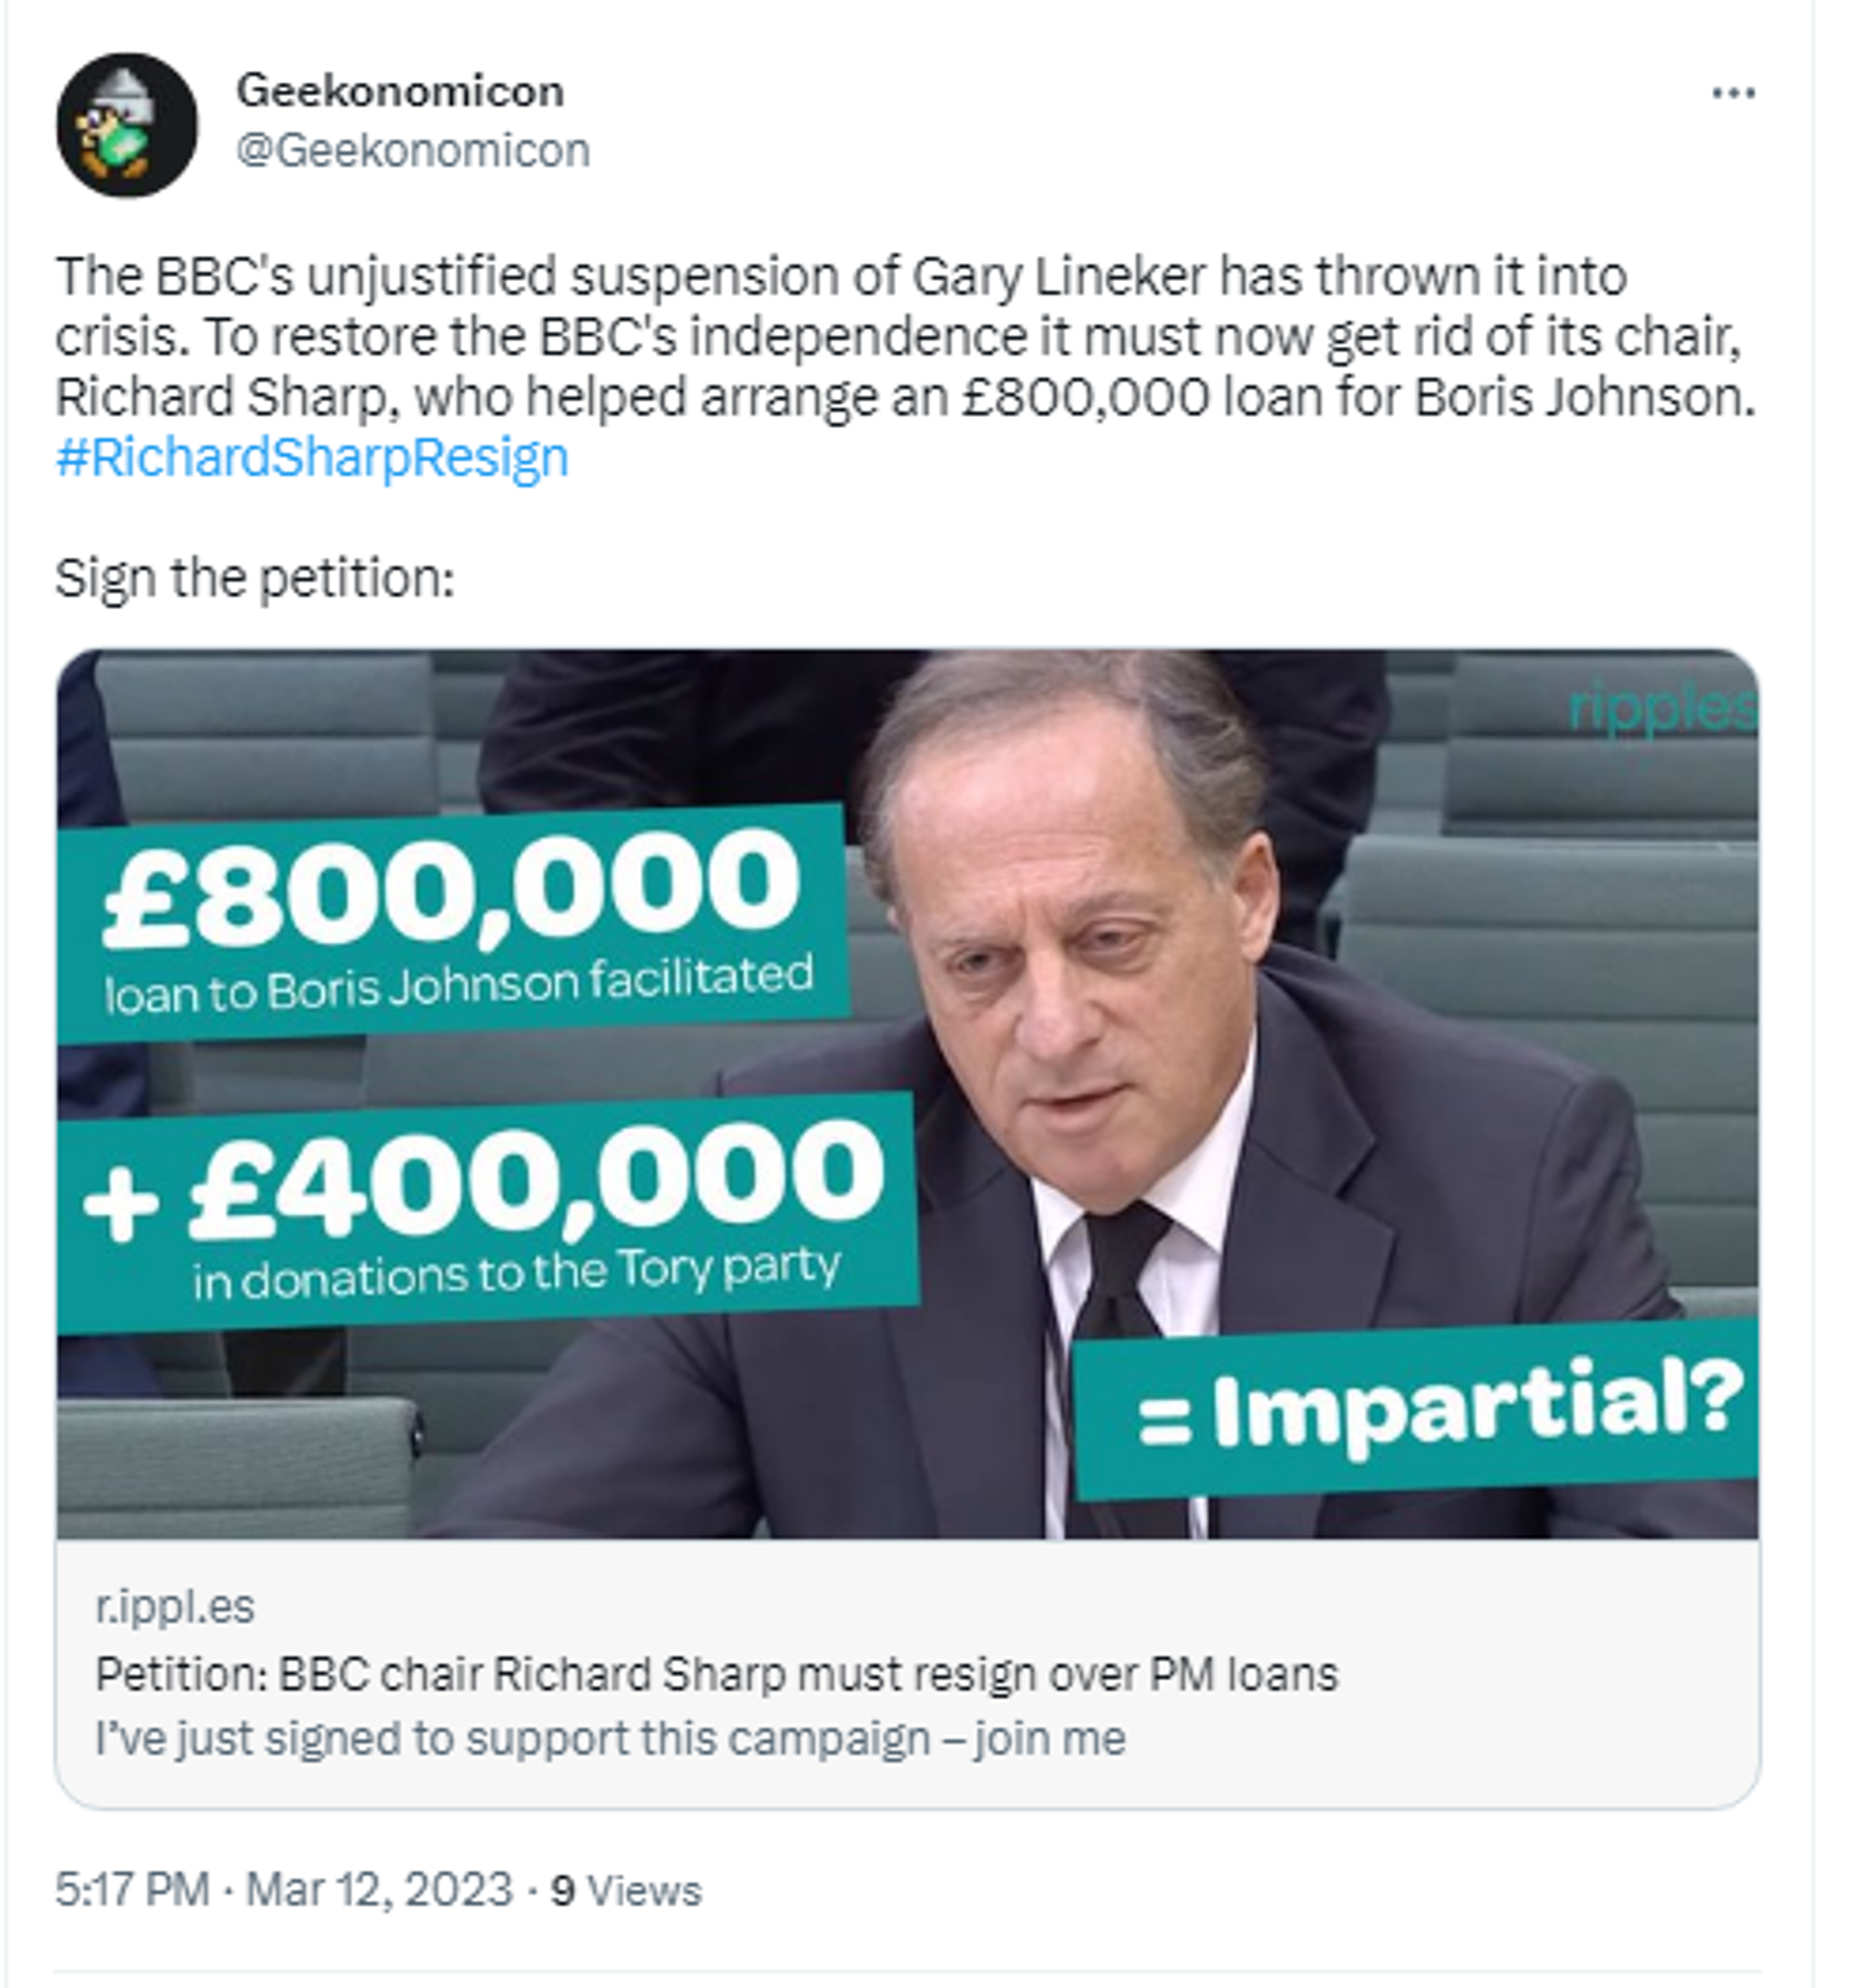 Screenshot of Twitter post featuring call to sign a petition for BBC chair Richard Sharp to resign after suspension of Gary Lineker. - Sputnik International, 1920, 12.03.2023